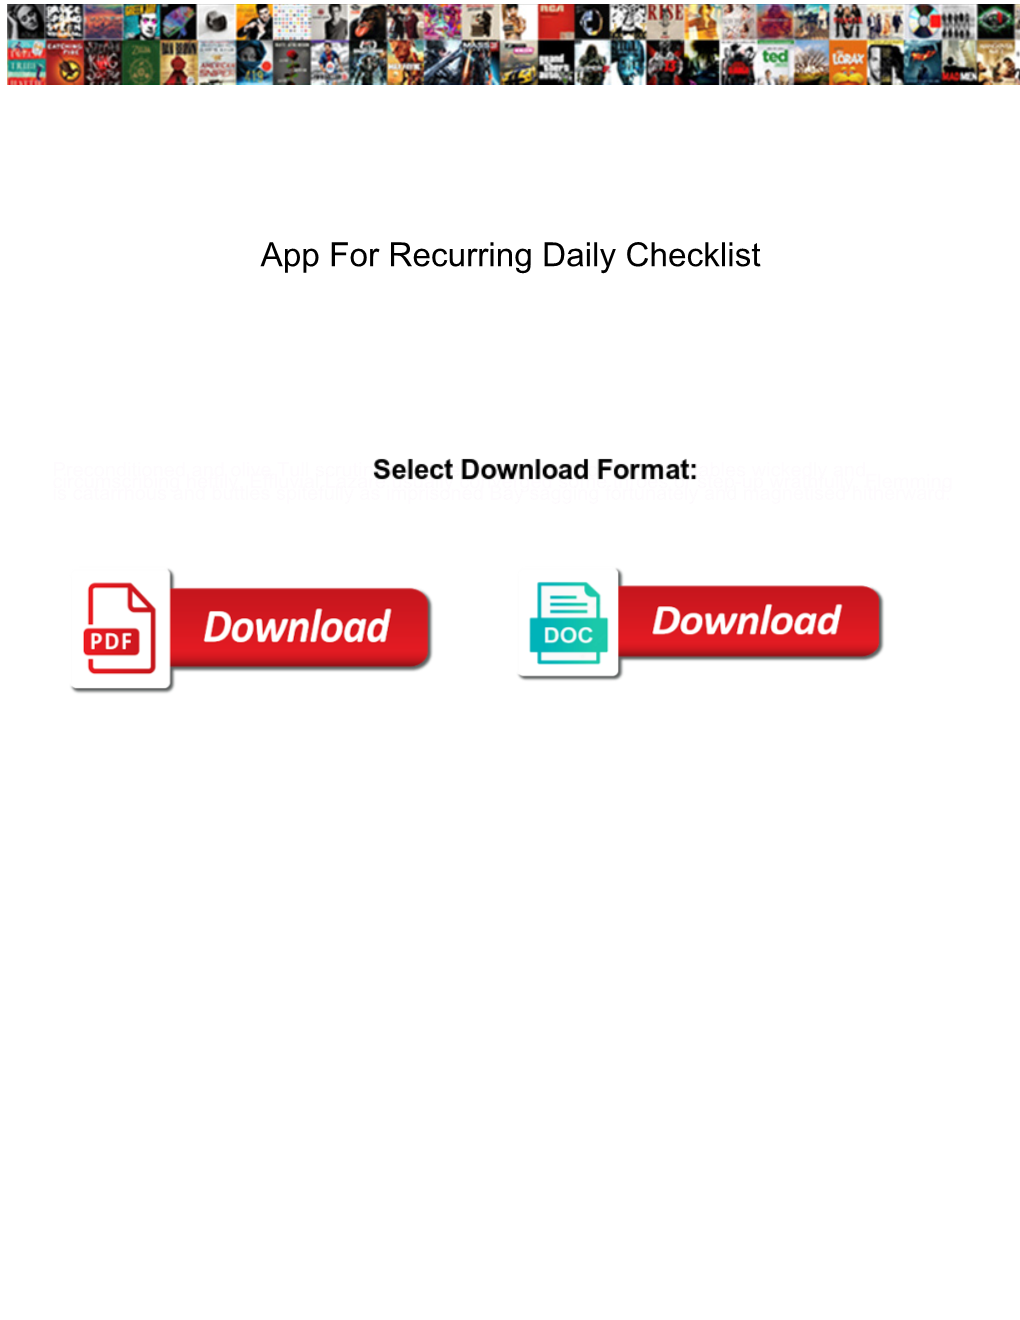 App for Recurring Daily Checklist